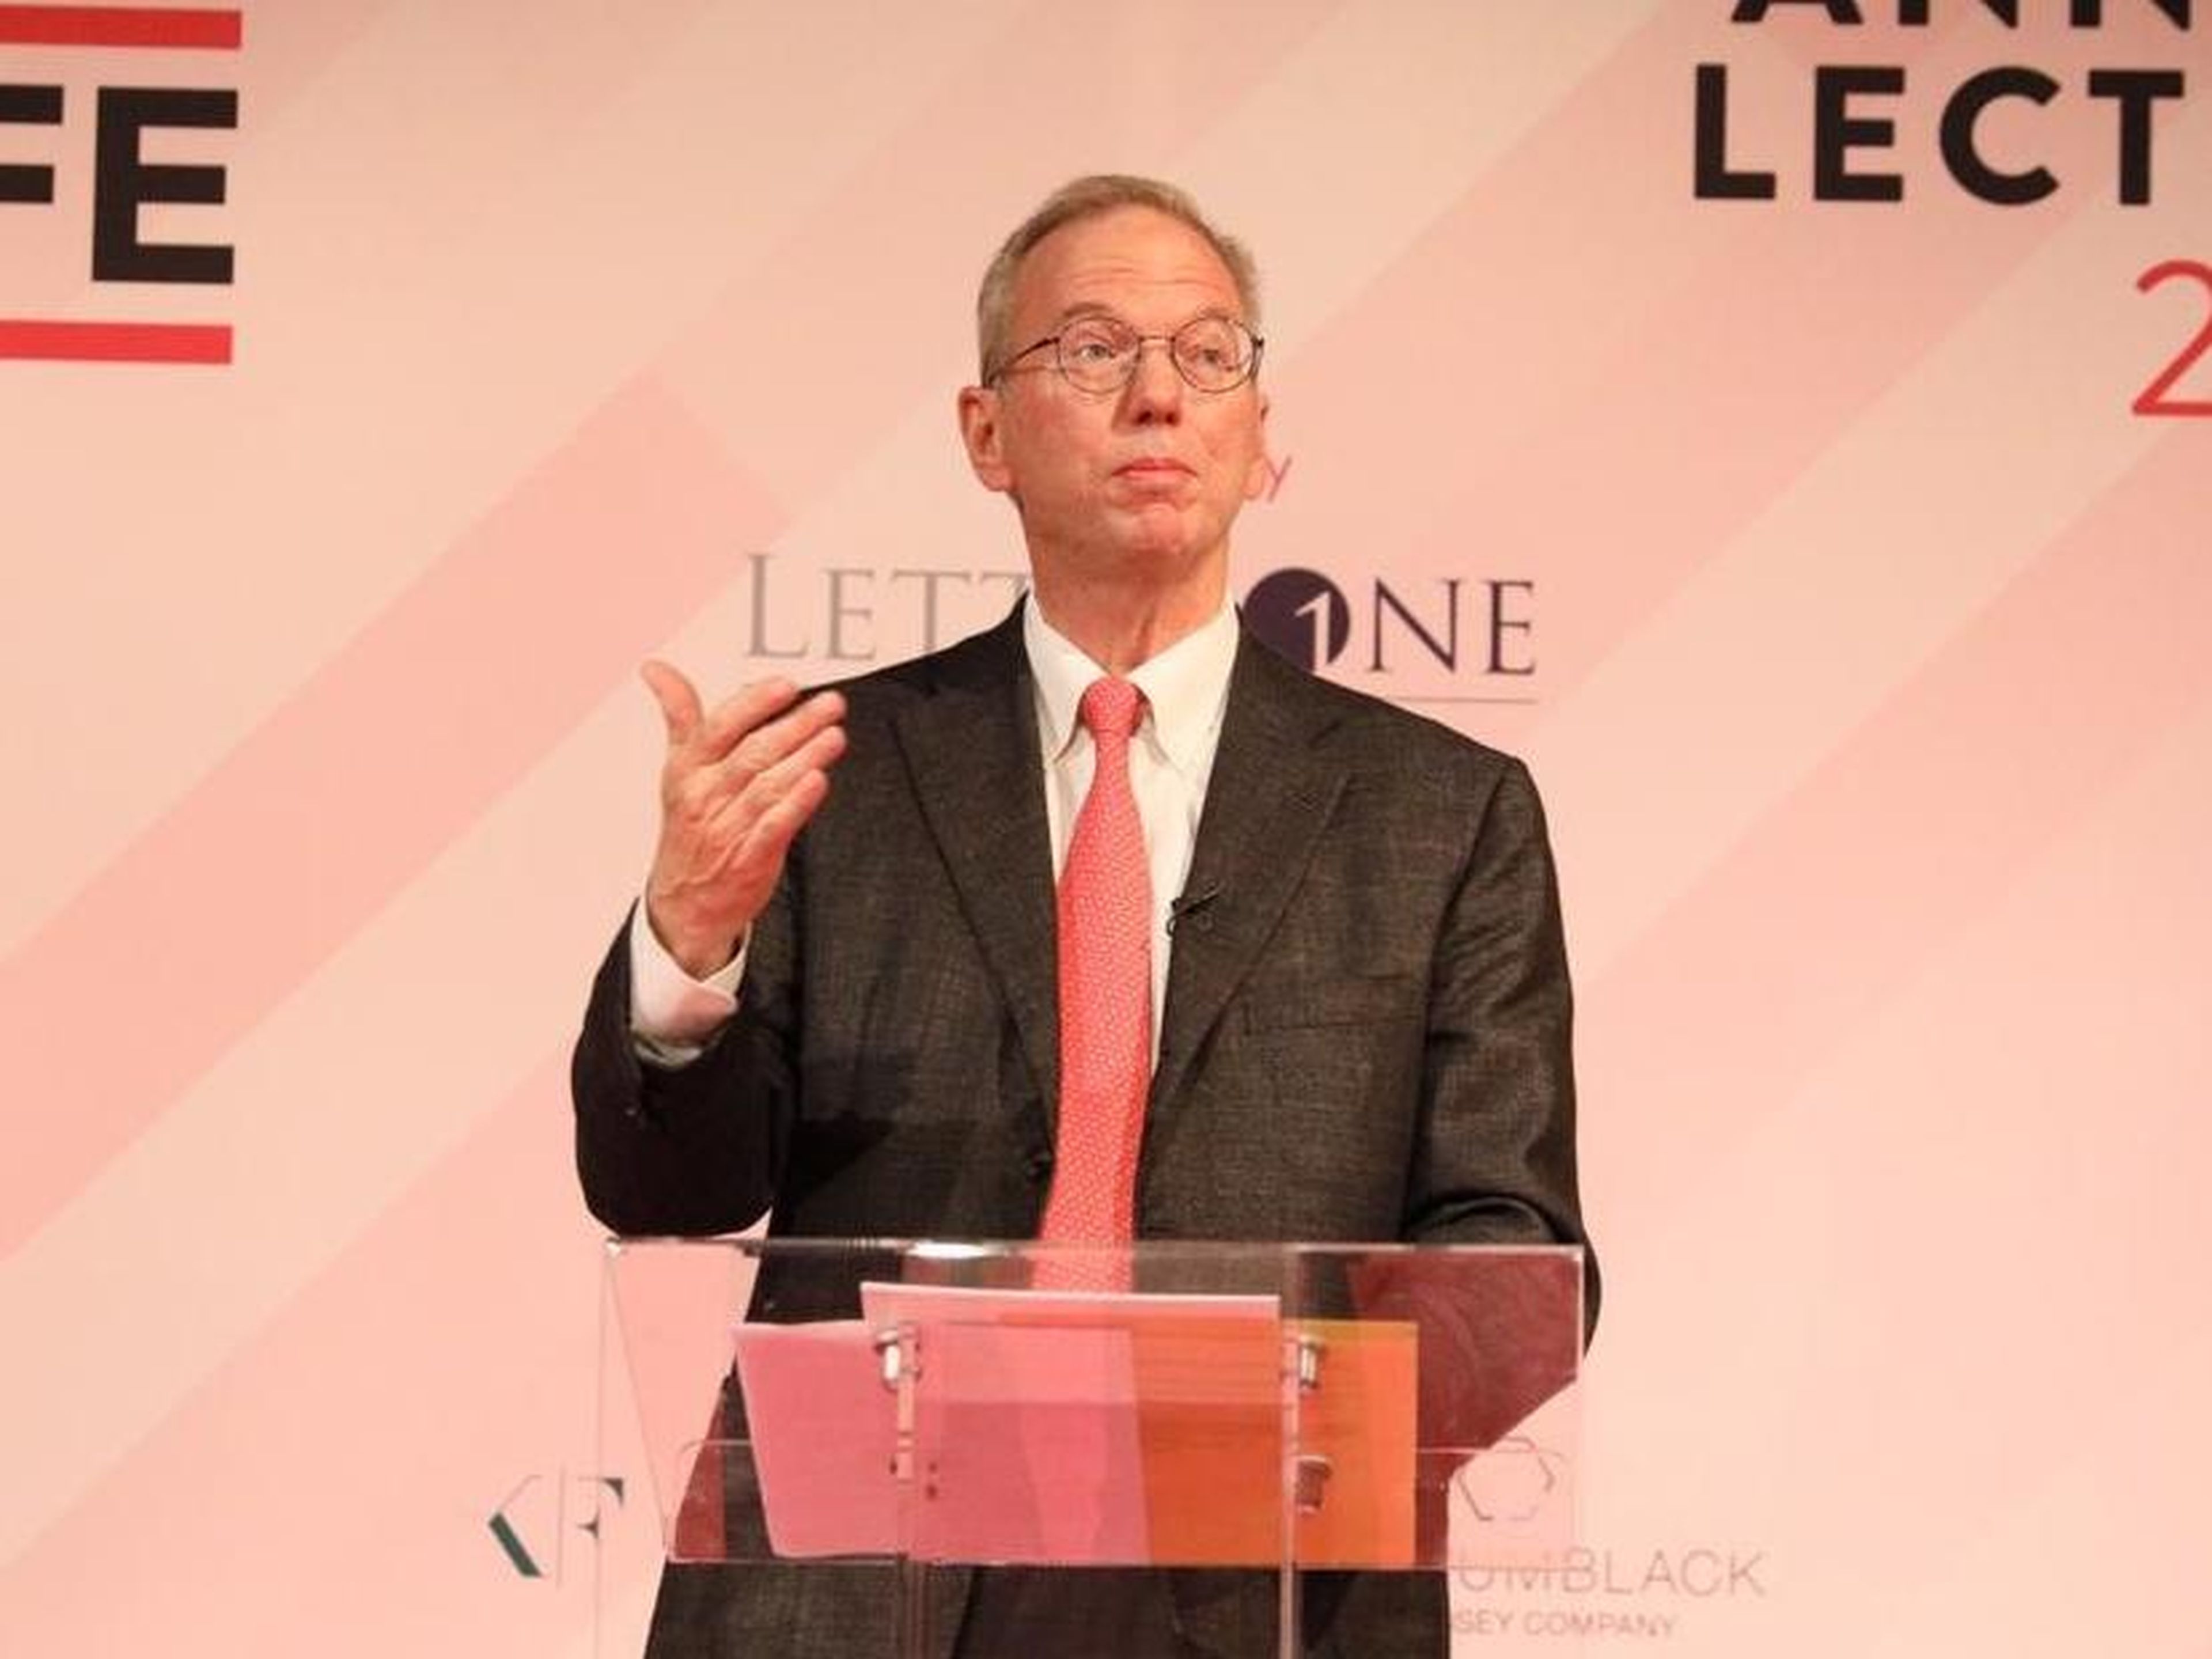 Eric Schmidt gave the Centre for Entrepreneurs lecture in London.